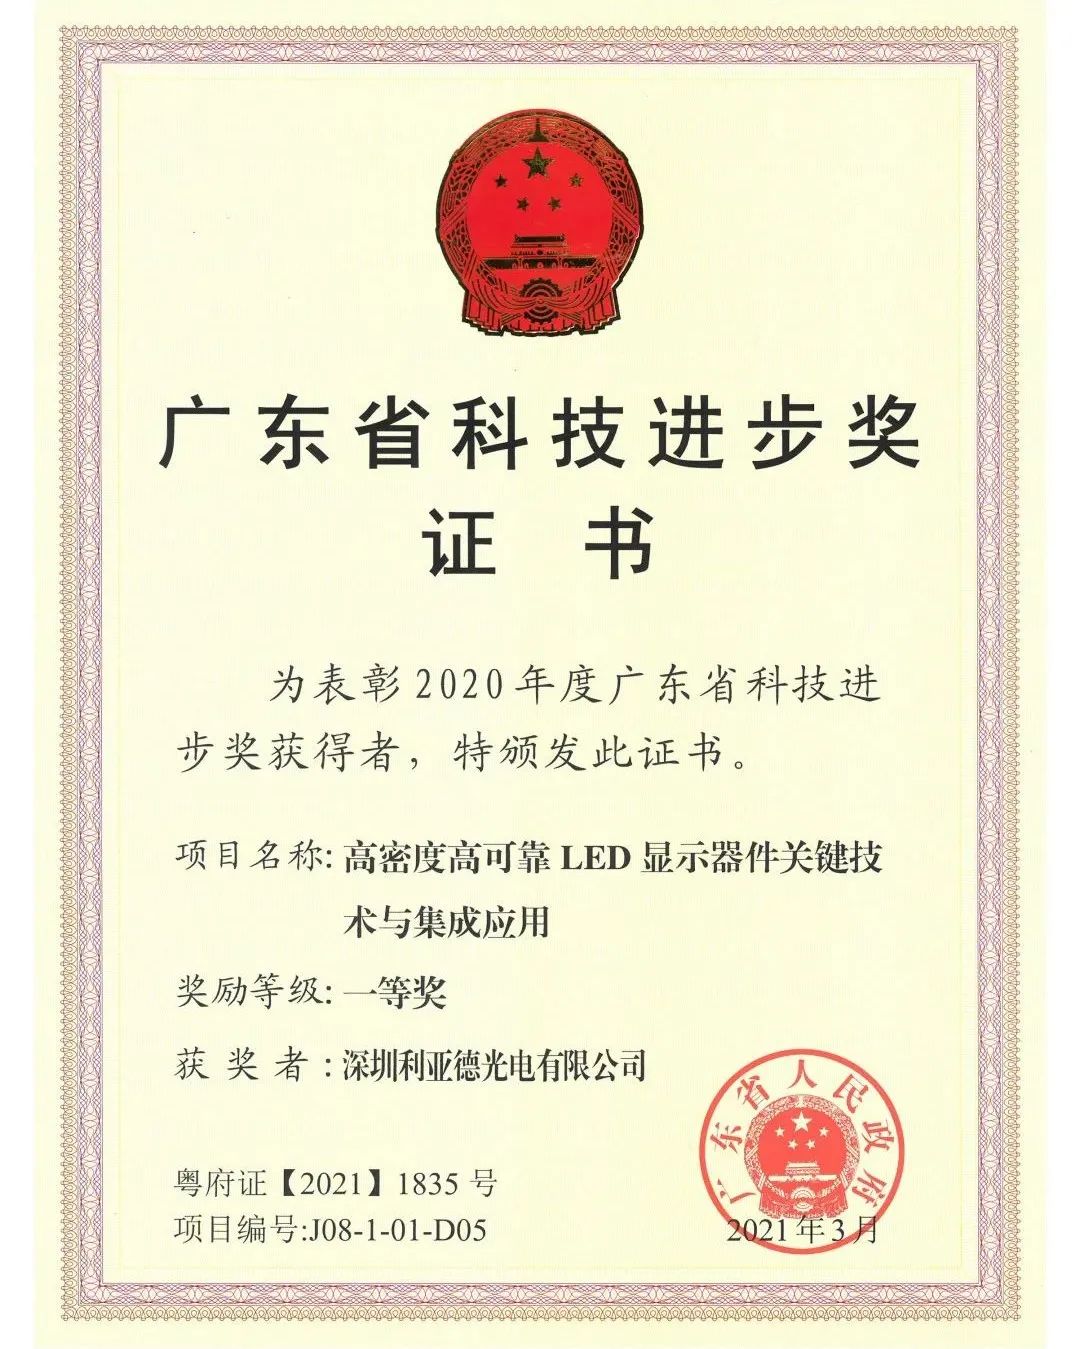 Leyard Claims the First Prize of Guangdong Science and Technology Progress Award